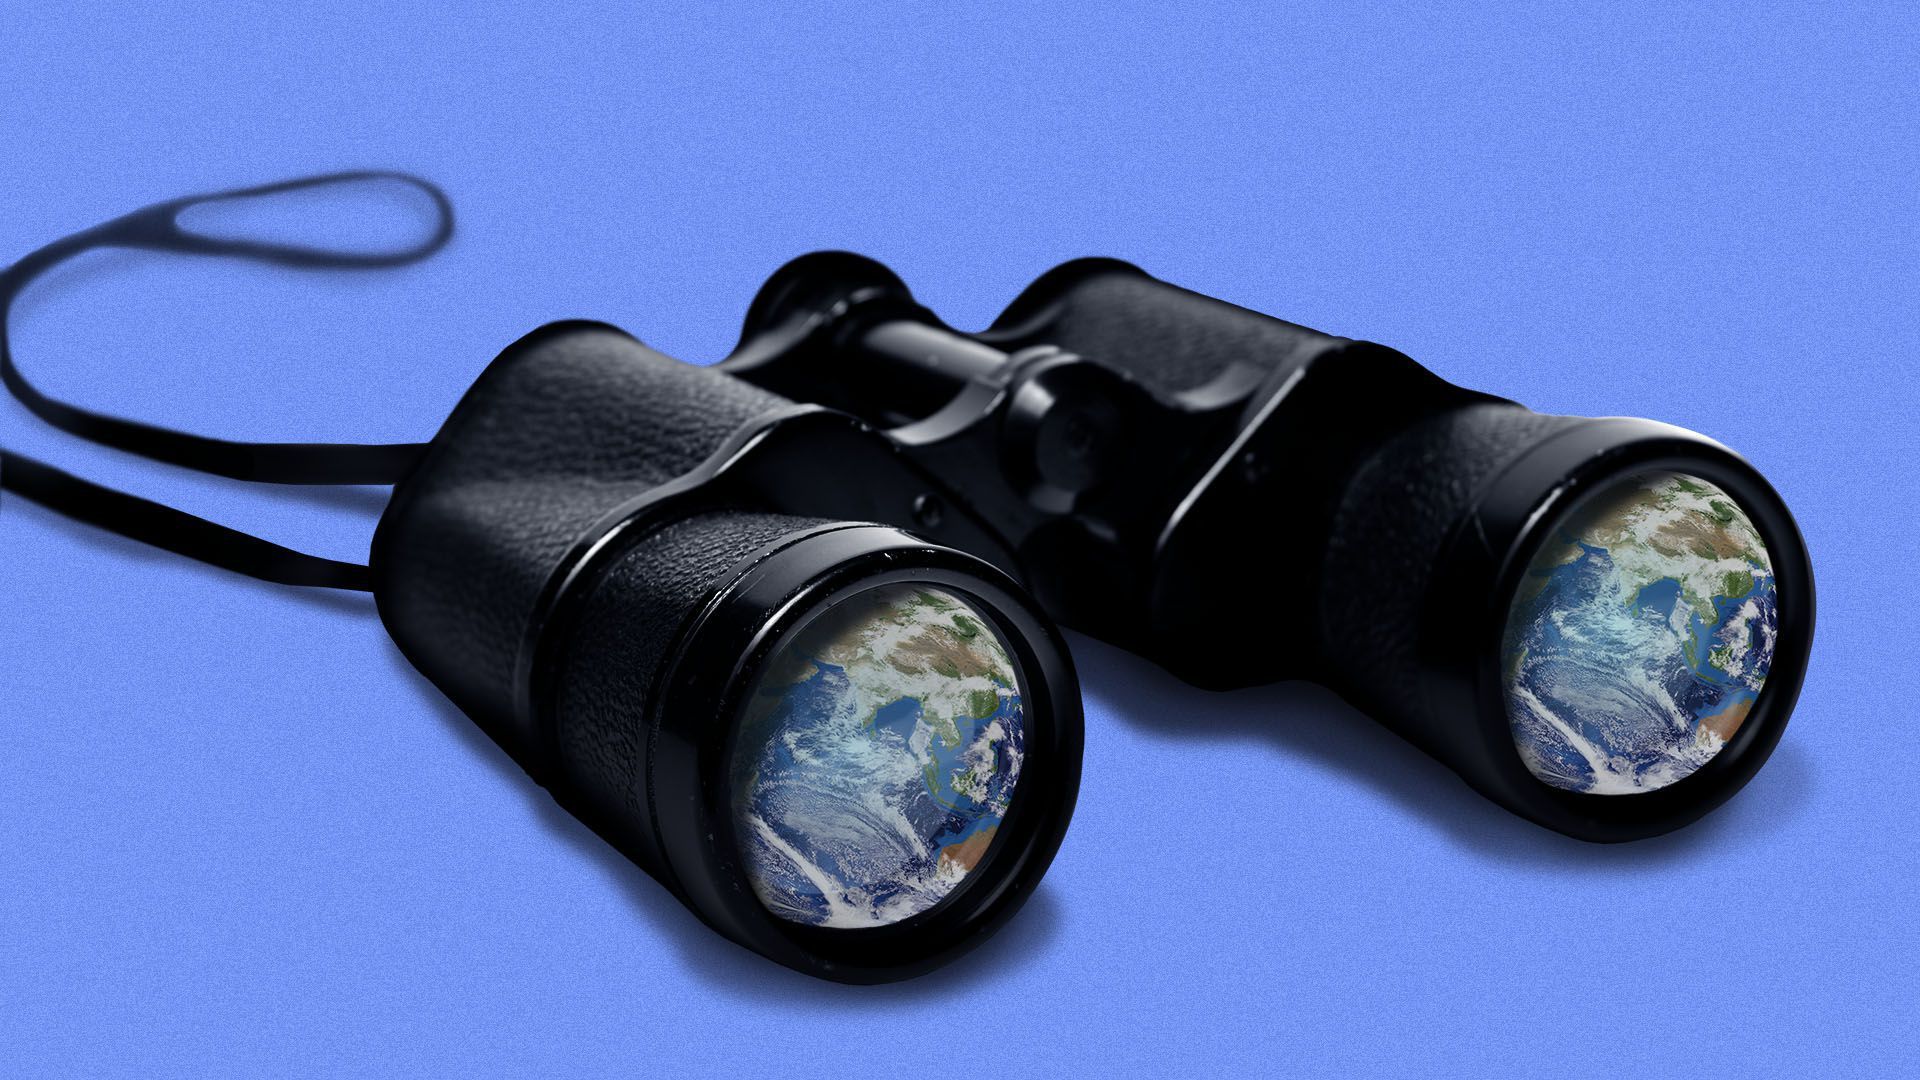 Illustration of binoculars with images of the Earth in its lenses 